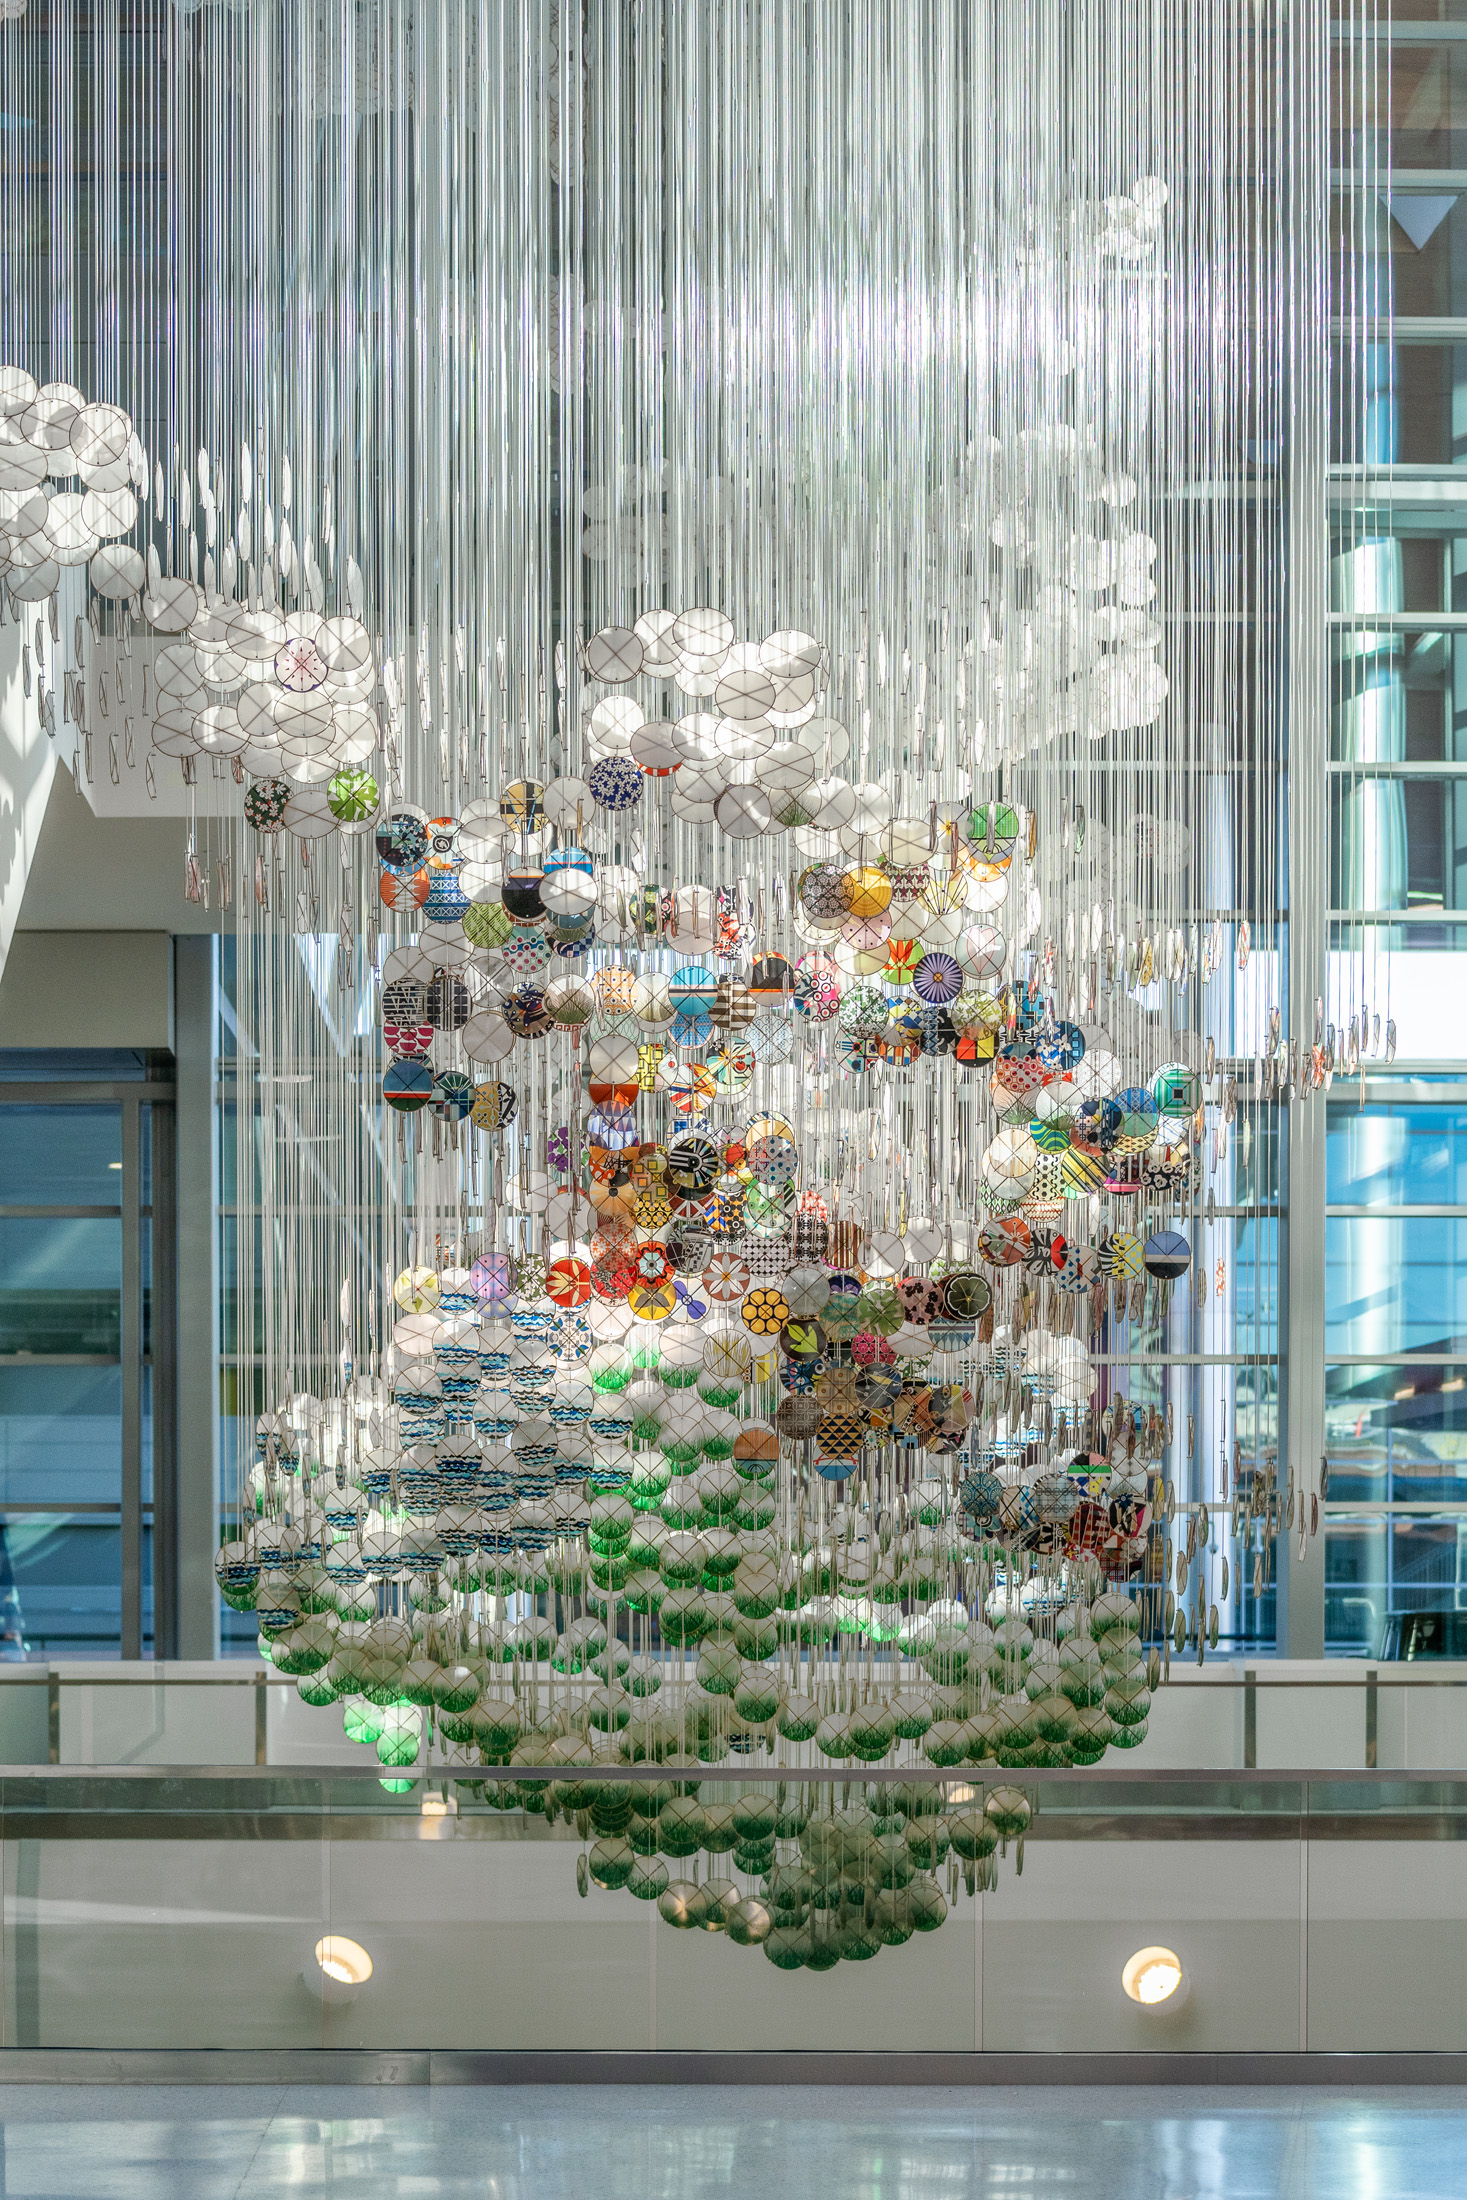 “The Unscalable Rampart of Time”, 2022 – Jacob Hashimoto